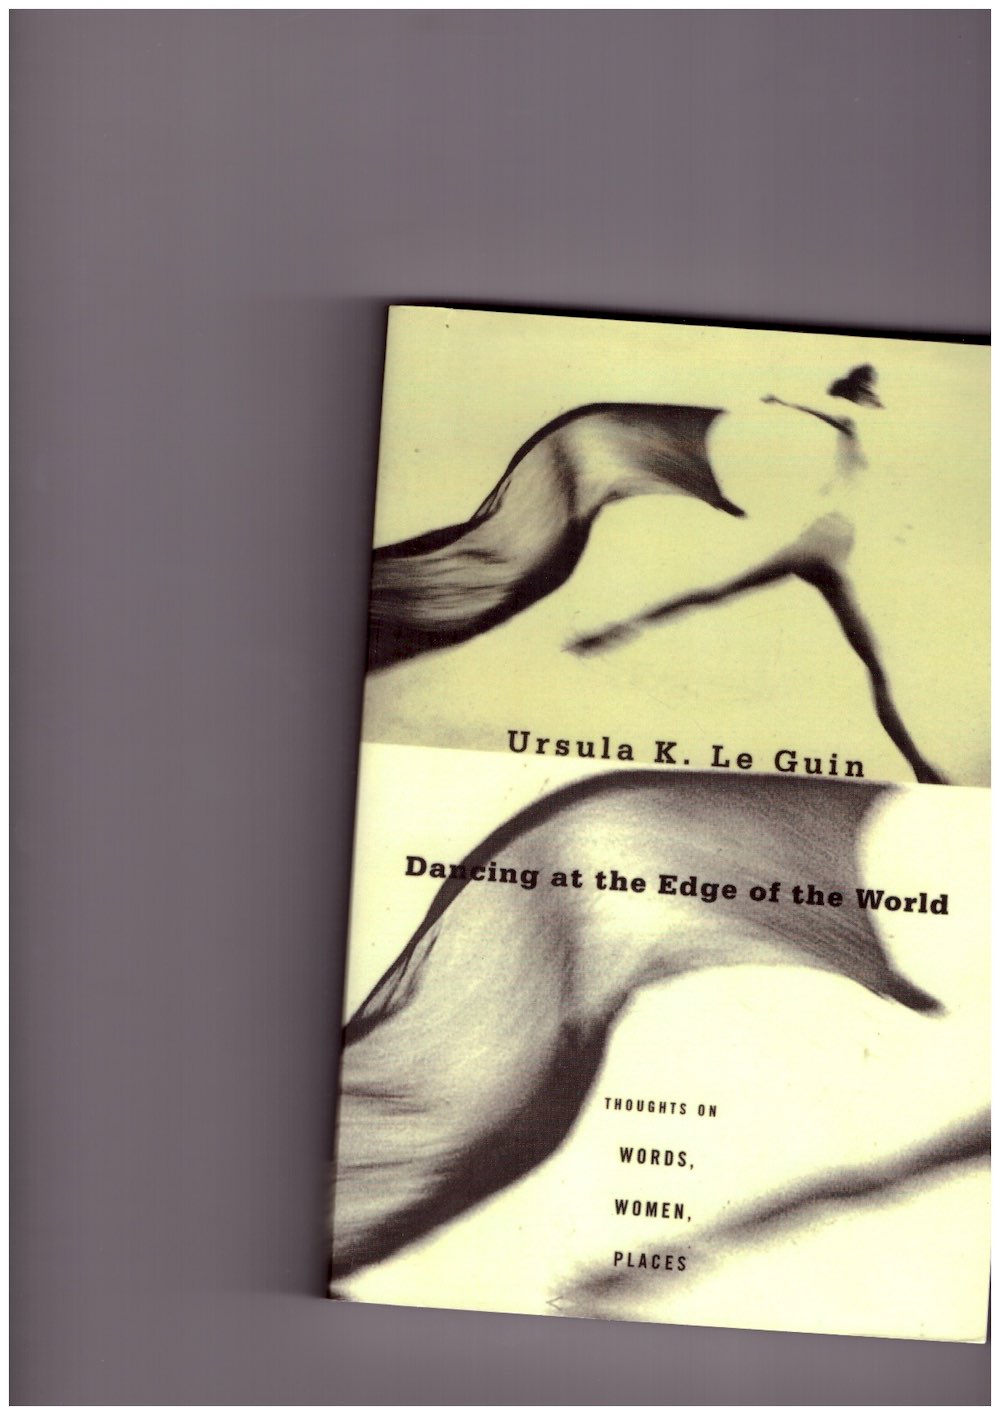 LE GUIN, Ursula K. - Dancing at the Edge of the World. Thoughts on Words, Women, Places